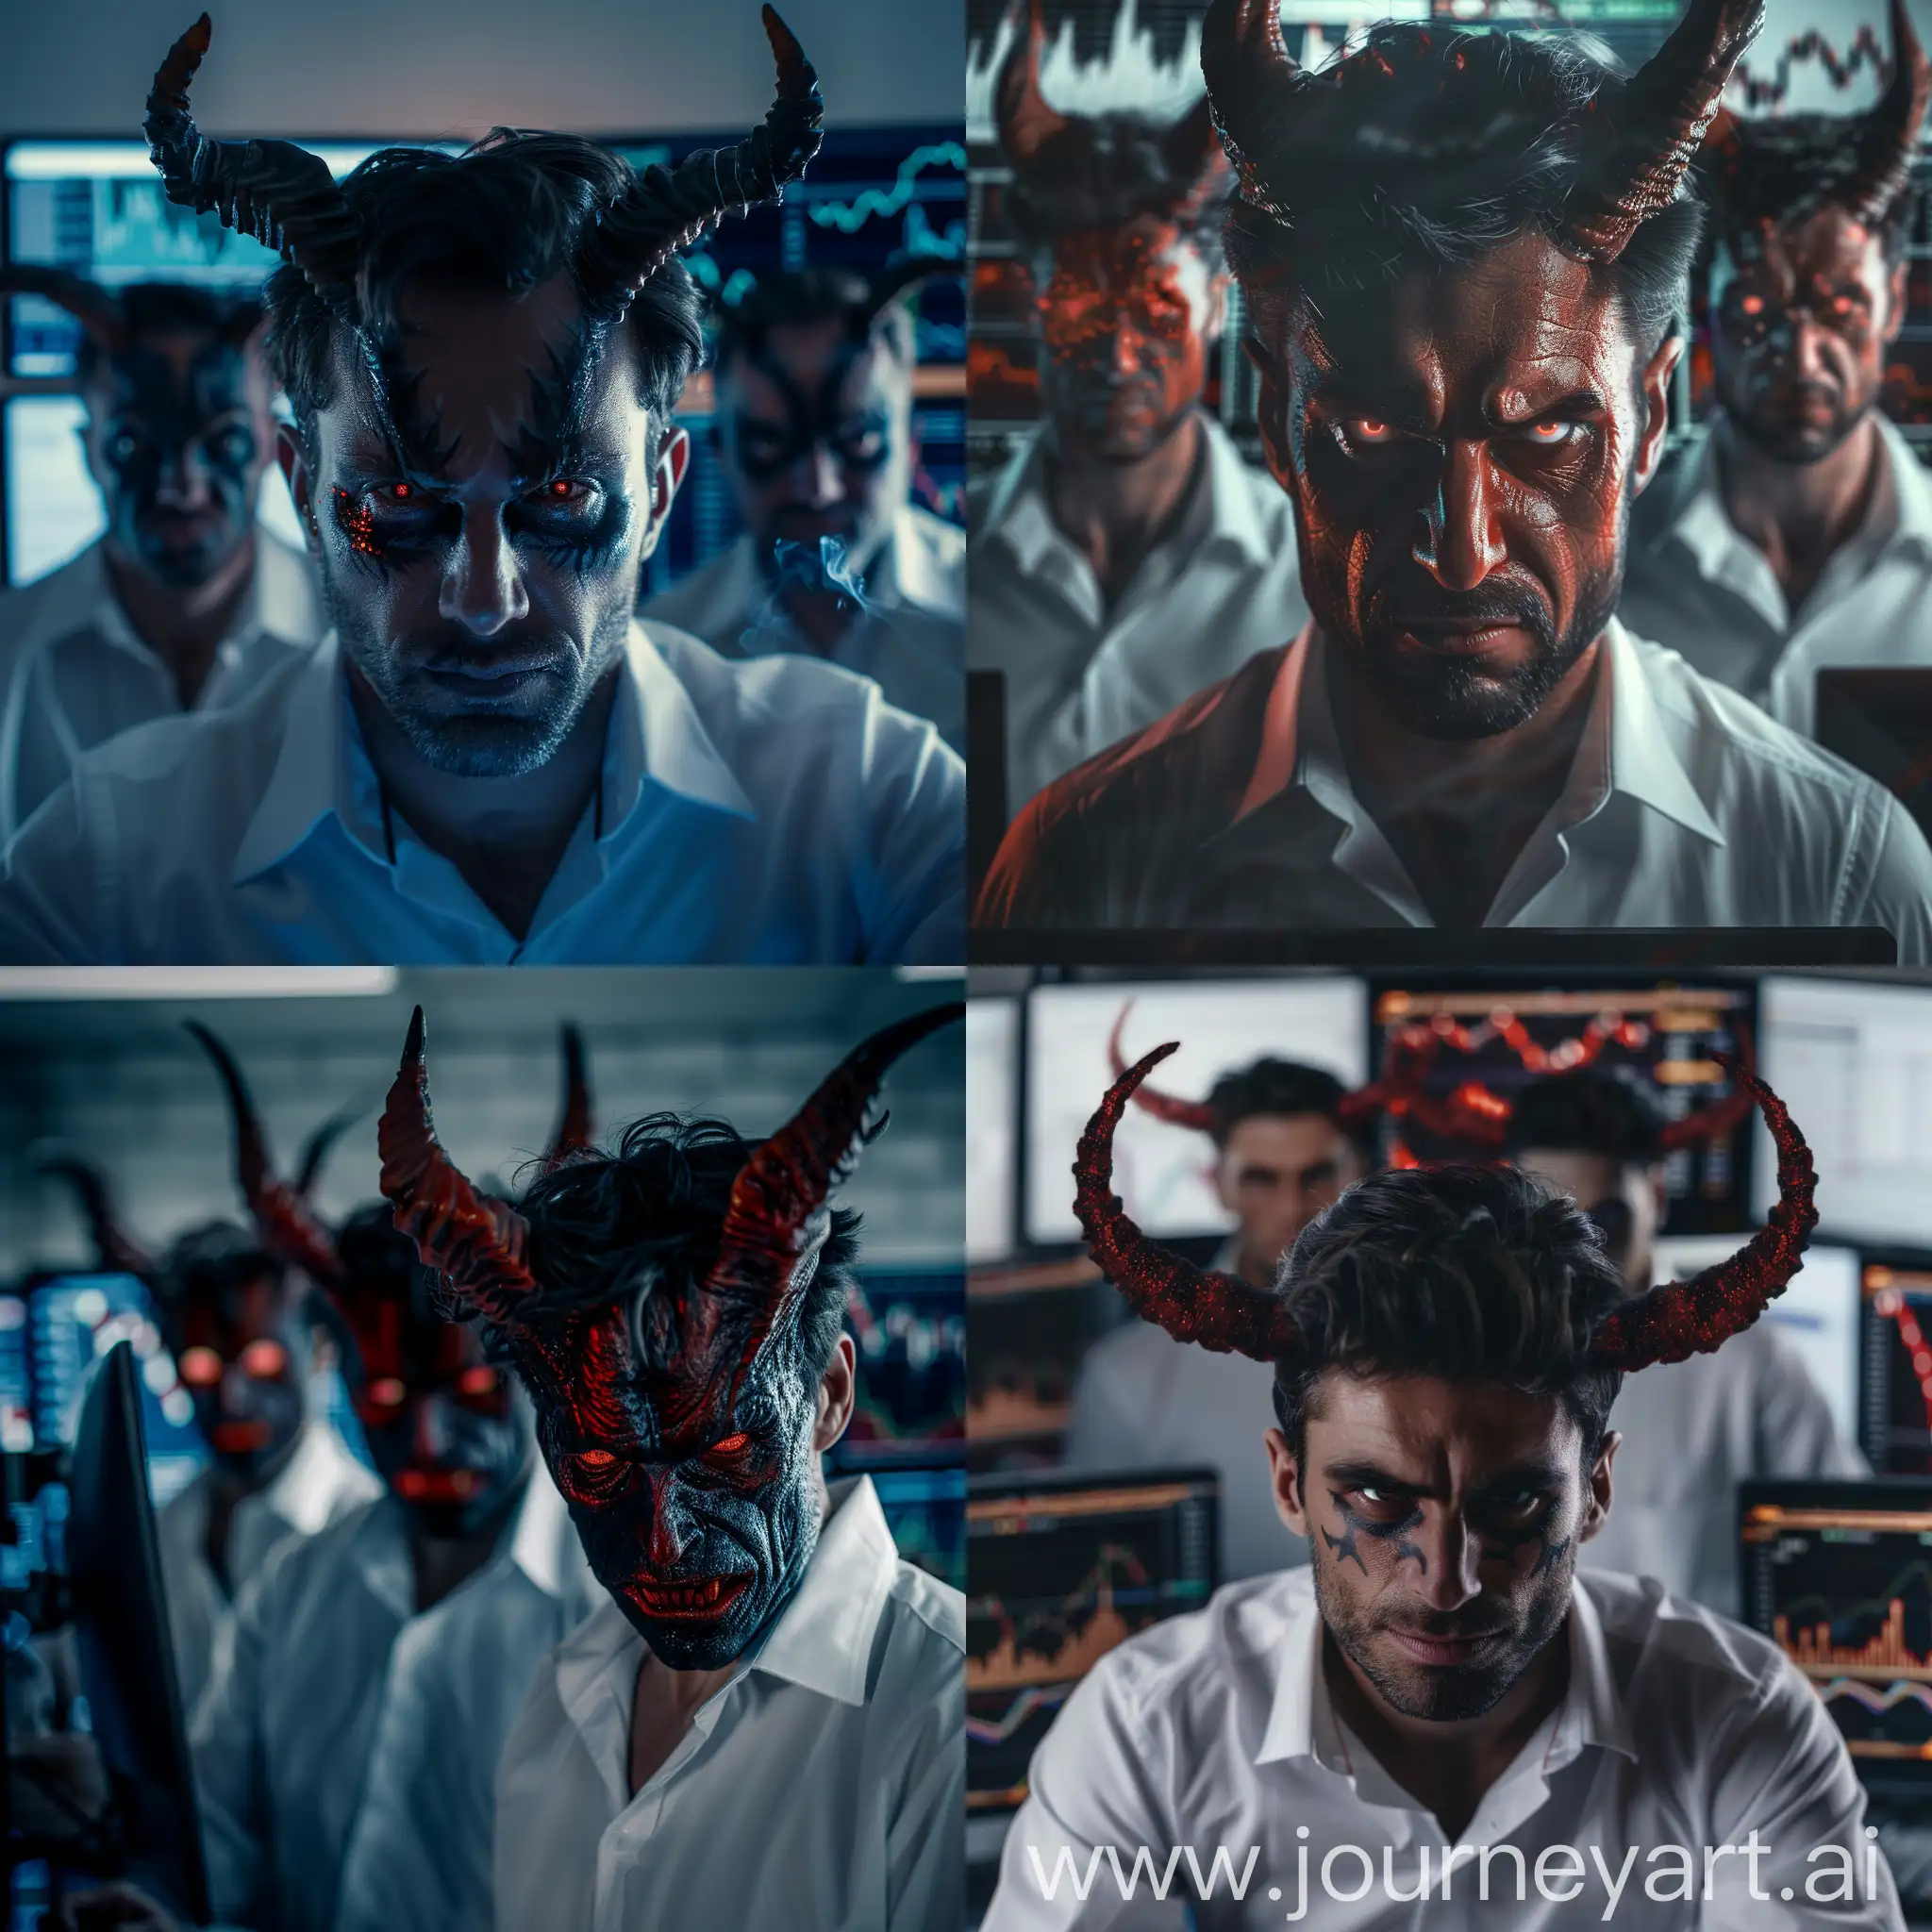 Trading, devil traders, wall street, stocks and markets, beautiful demons, several demons, demons with horns, trading stocks on the wall street, in business white shirts, beautiful, rich traders, monitors with graphs, c looking straight at me, close-up, 4k